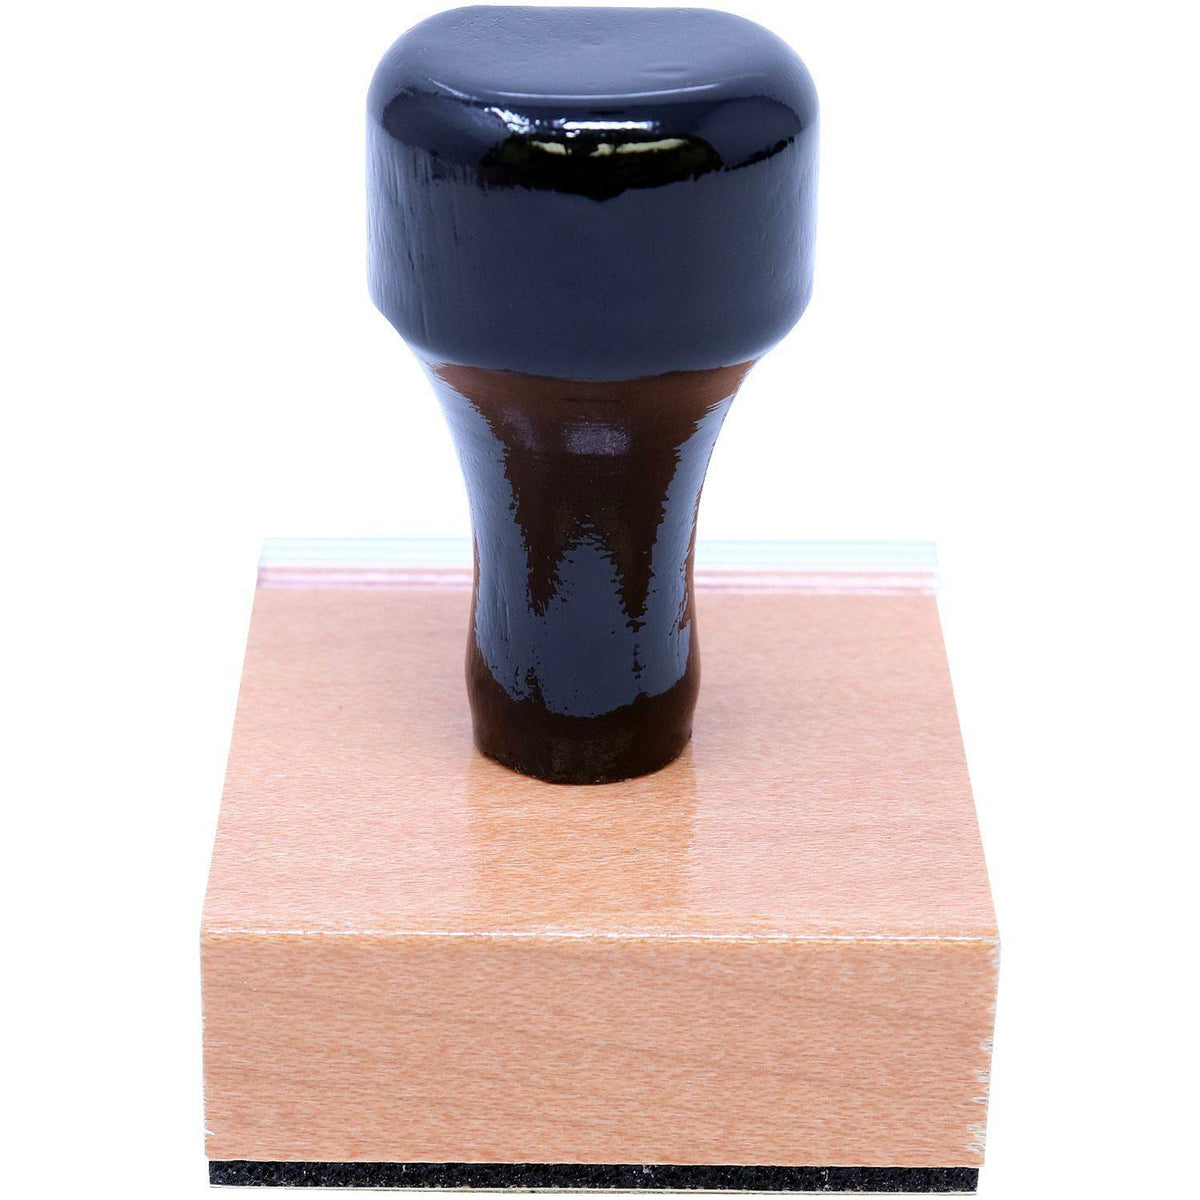 Landscape Architect Regular Rubber Stamp of Seal - Engineer Seal Stamps - Stamp Type_Hand Stamp, Type of Use_Professional